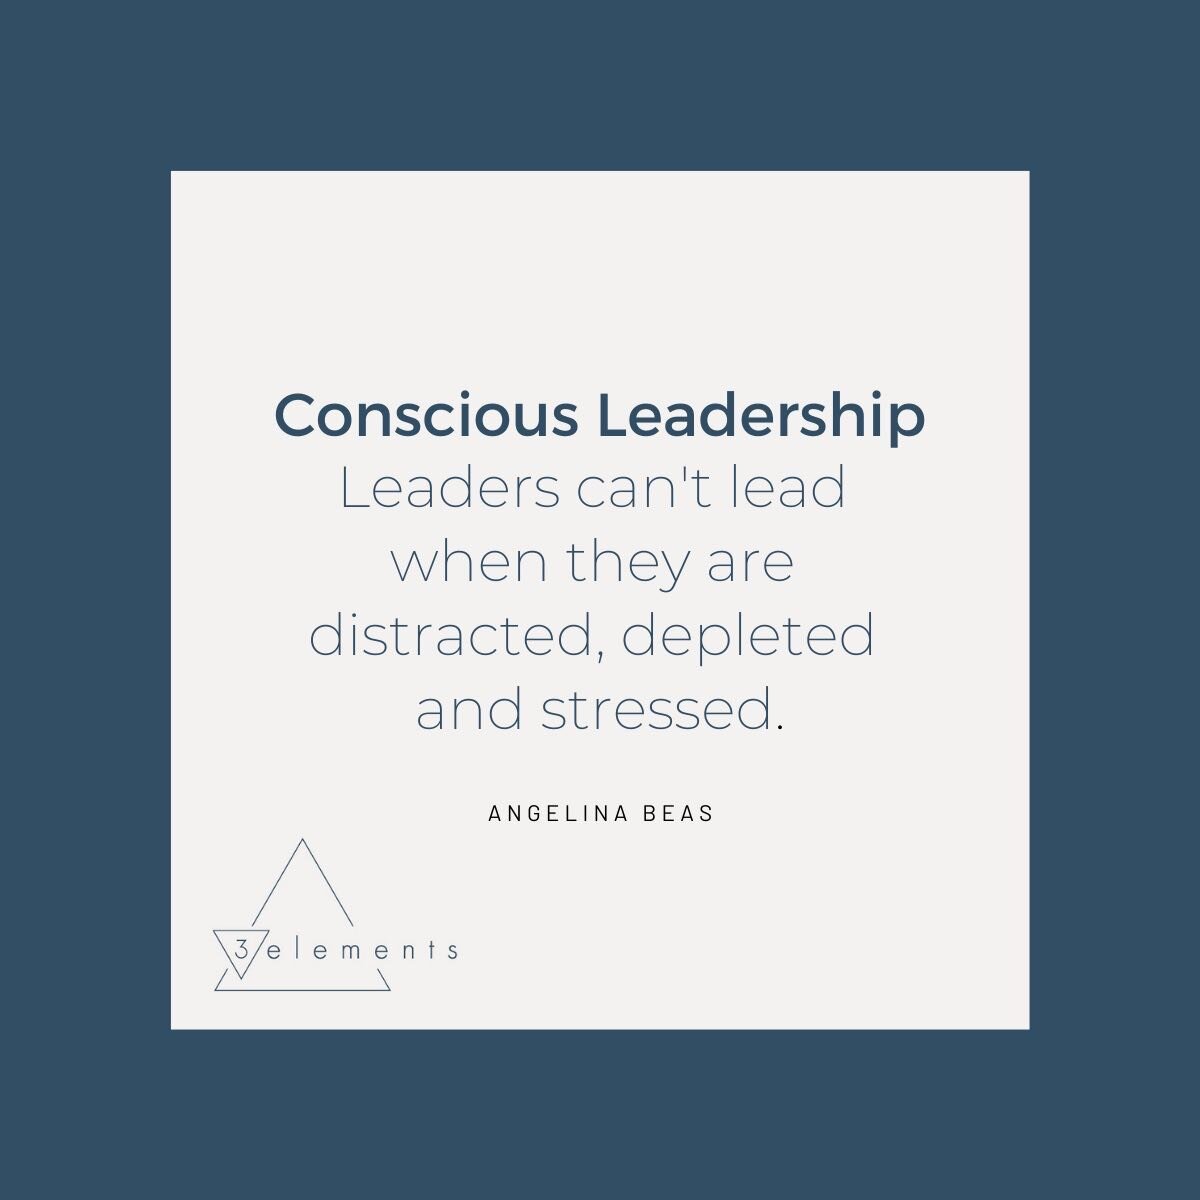 A conscious leader is one who is self aware about of when their limits are being reached and takes care of themself. They realize they effective leadership comes from a place of wholeness and health. #consciousleadership #executive #leadership #women